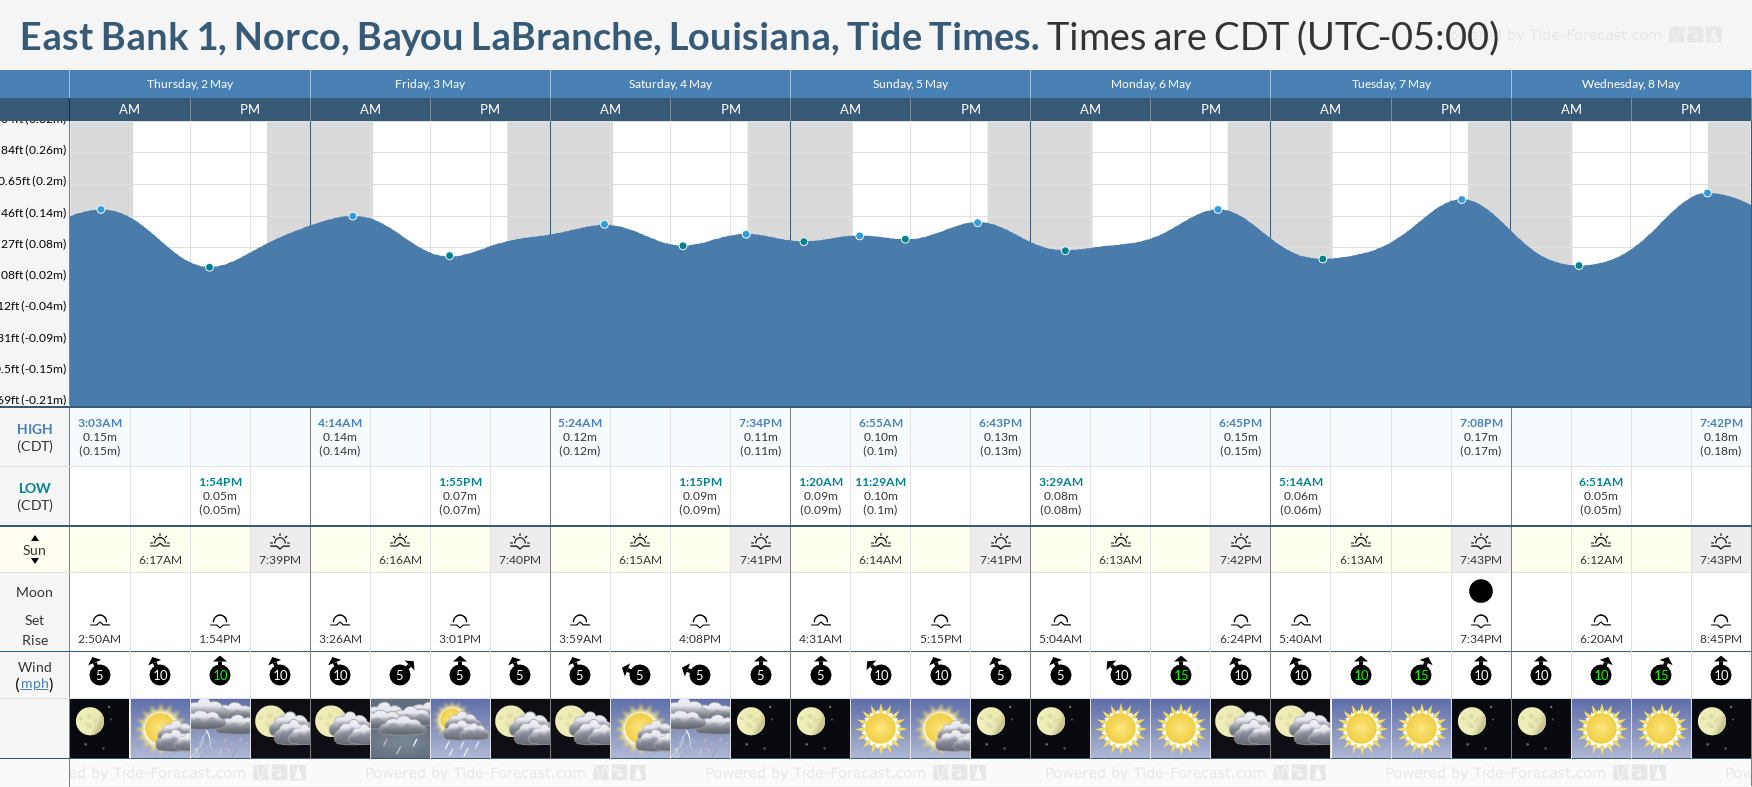 East Bank 1, Norco, Bayou LaBranche, Louisiana Tide Chart including high and low tide times for the next 7 days